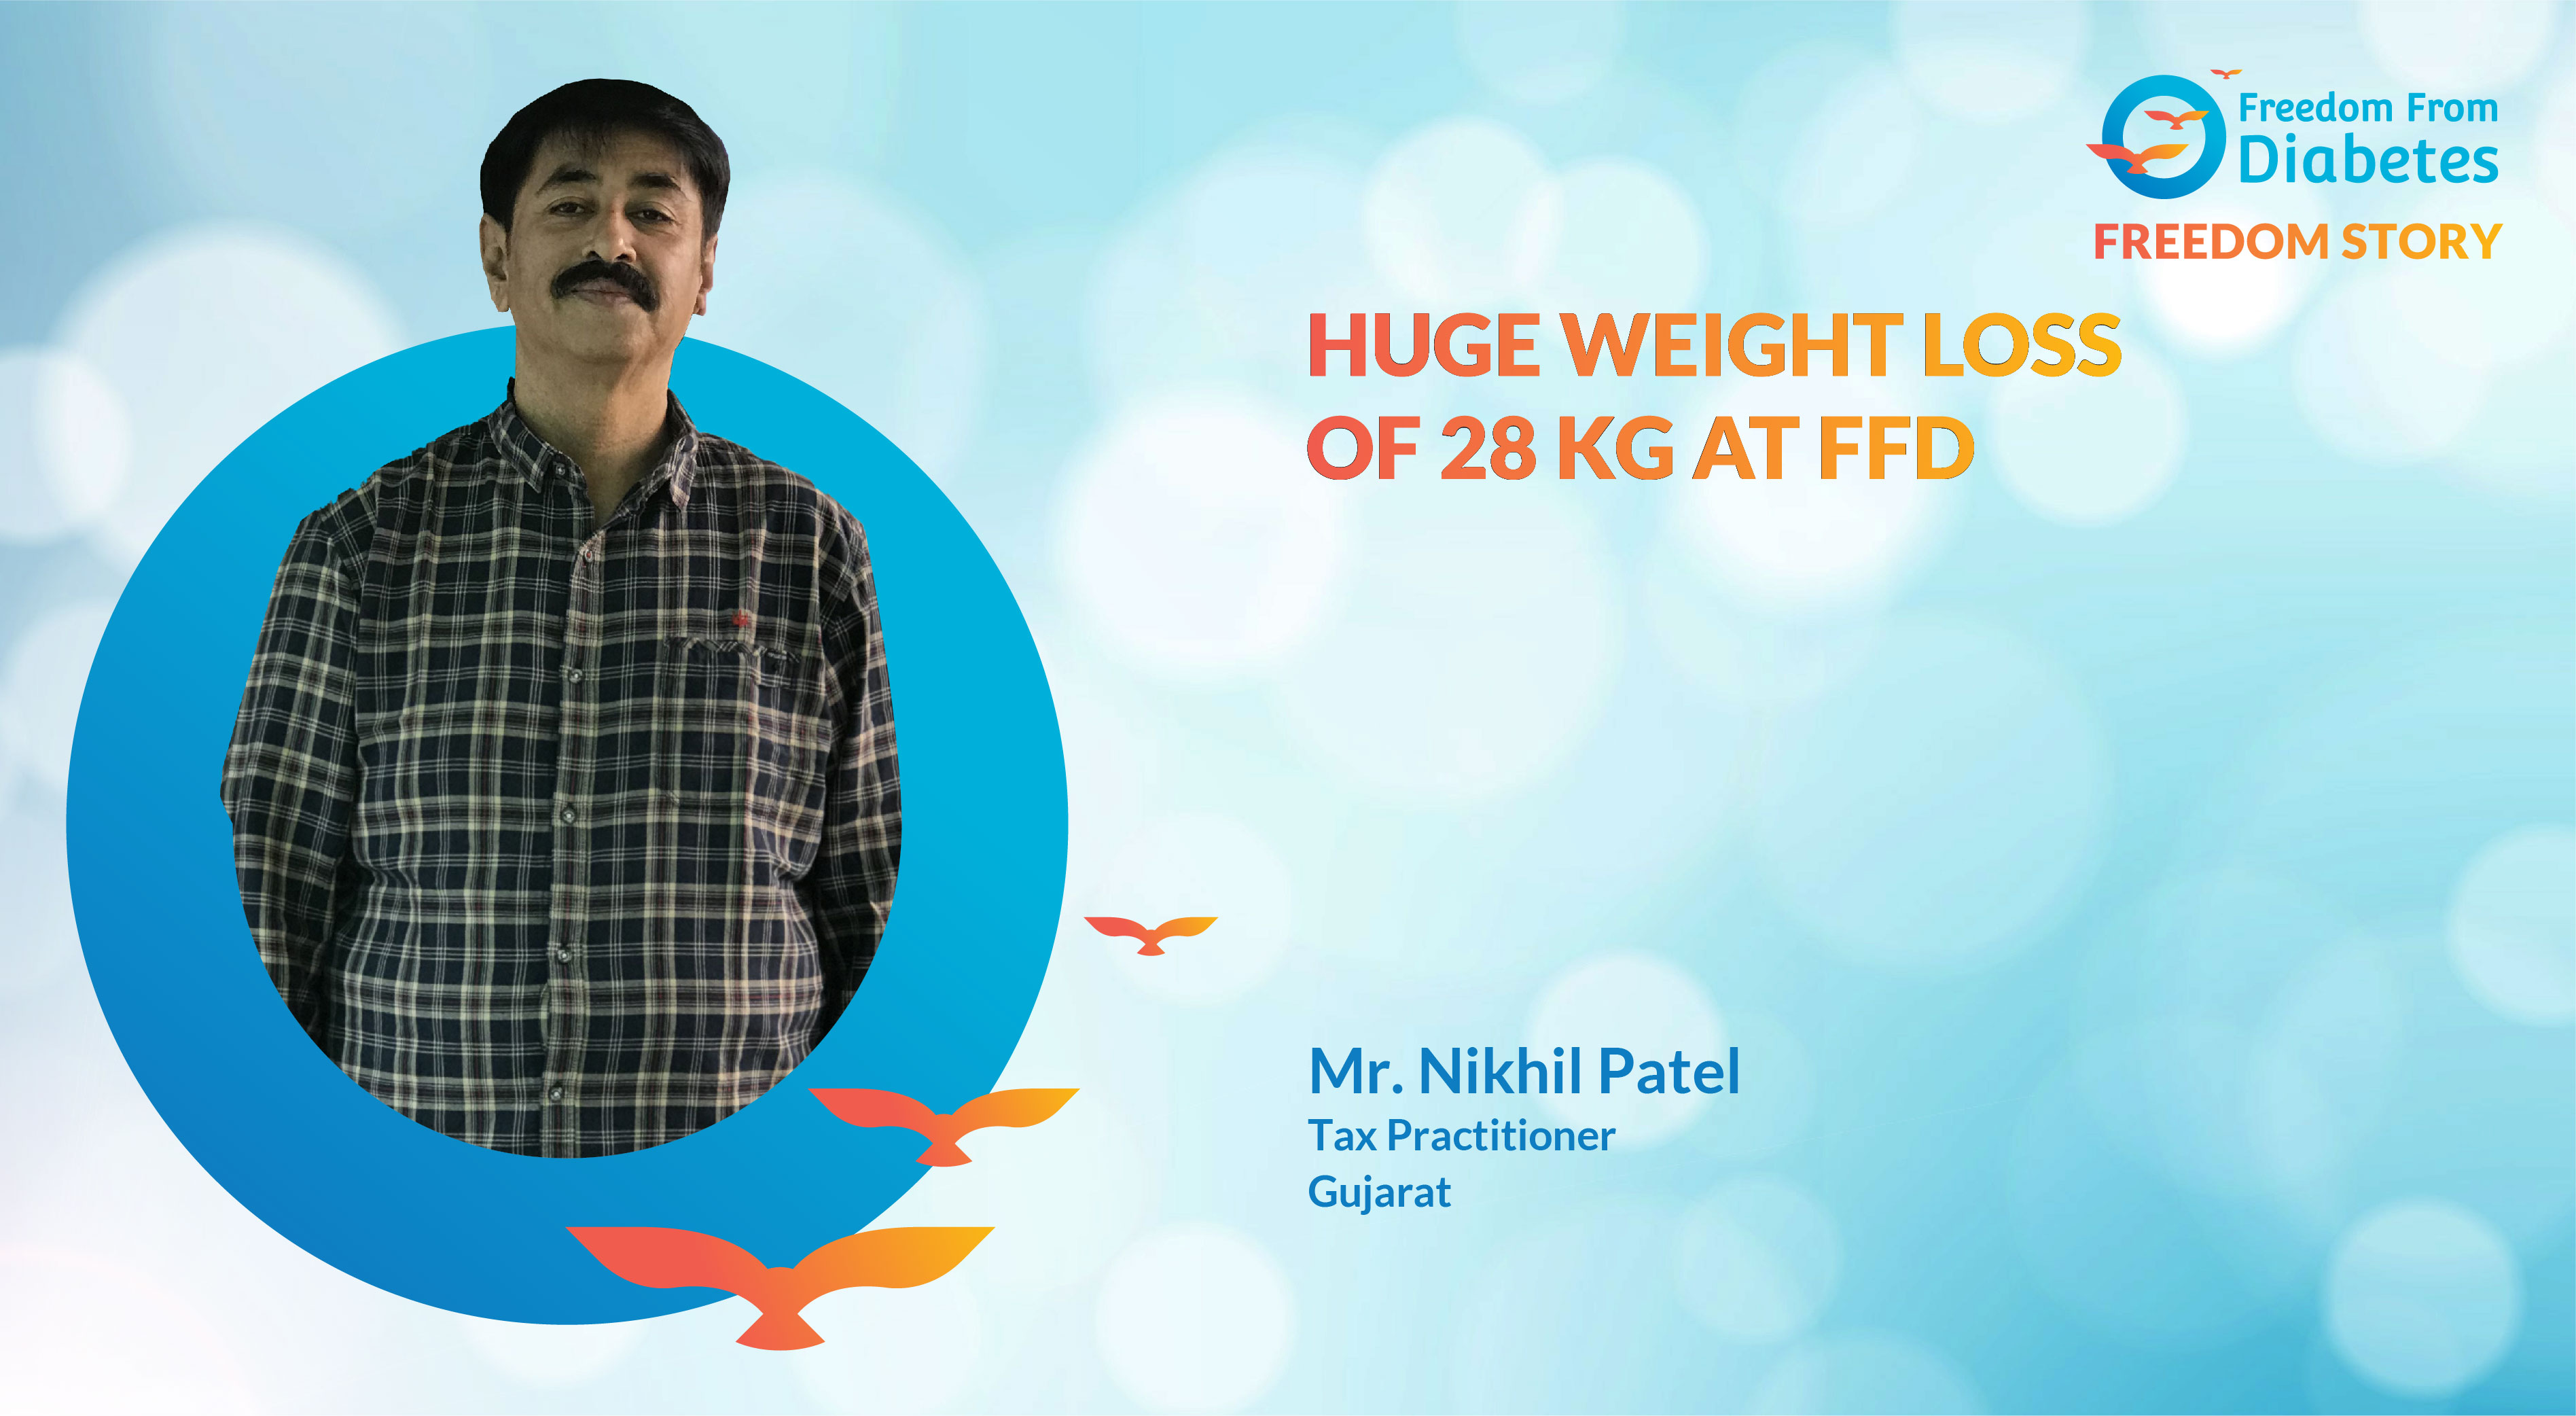 Nikhil Patel: How I lost a huge 28 kg weight at FFD